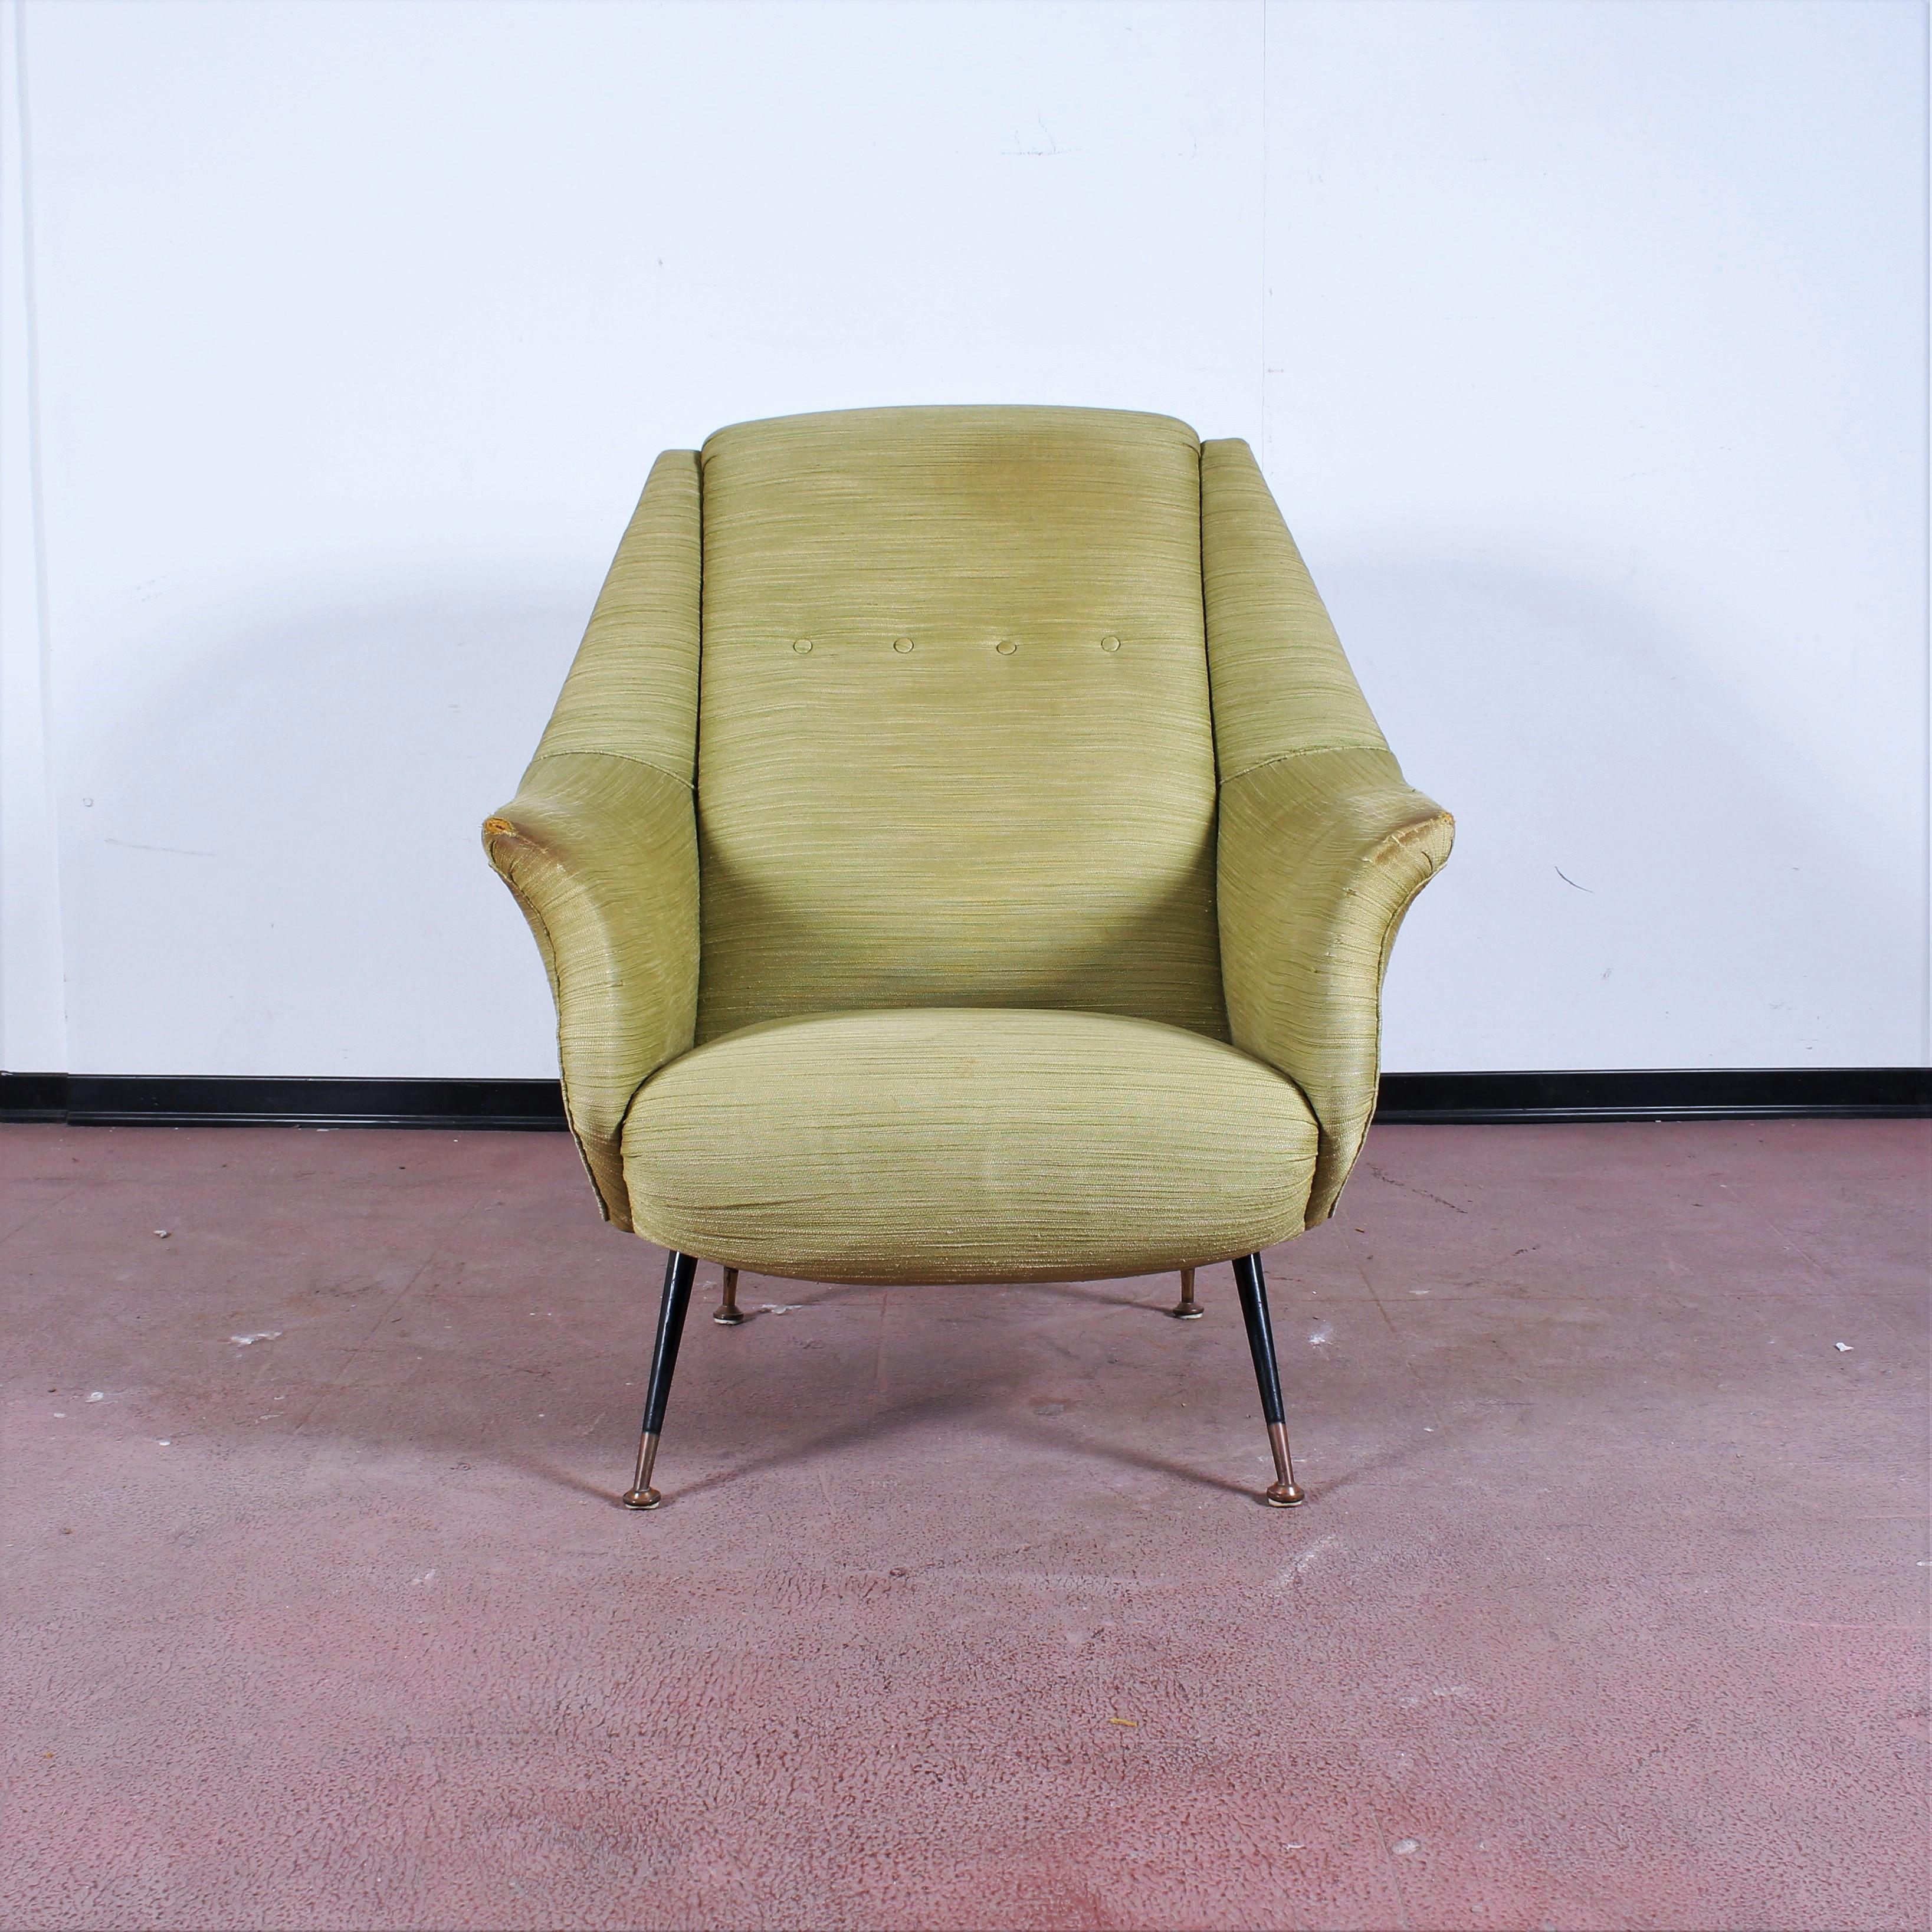 Very beautiful armchair with wooden frame lined with antique light green fabric, and burnished brass legs. Attributed to Gigi Radice for Minotti, Italy, 1950s.
Wear consistent with age and use.